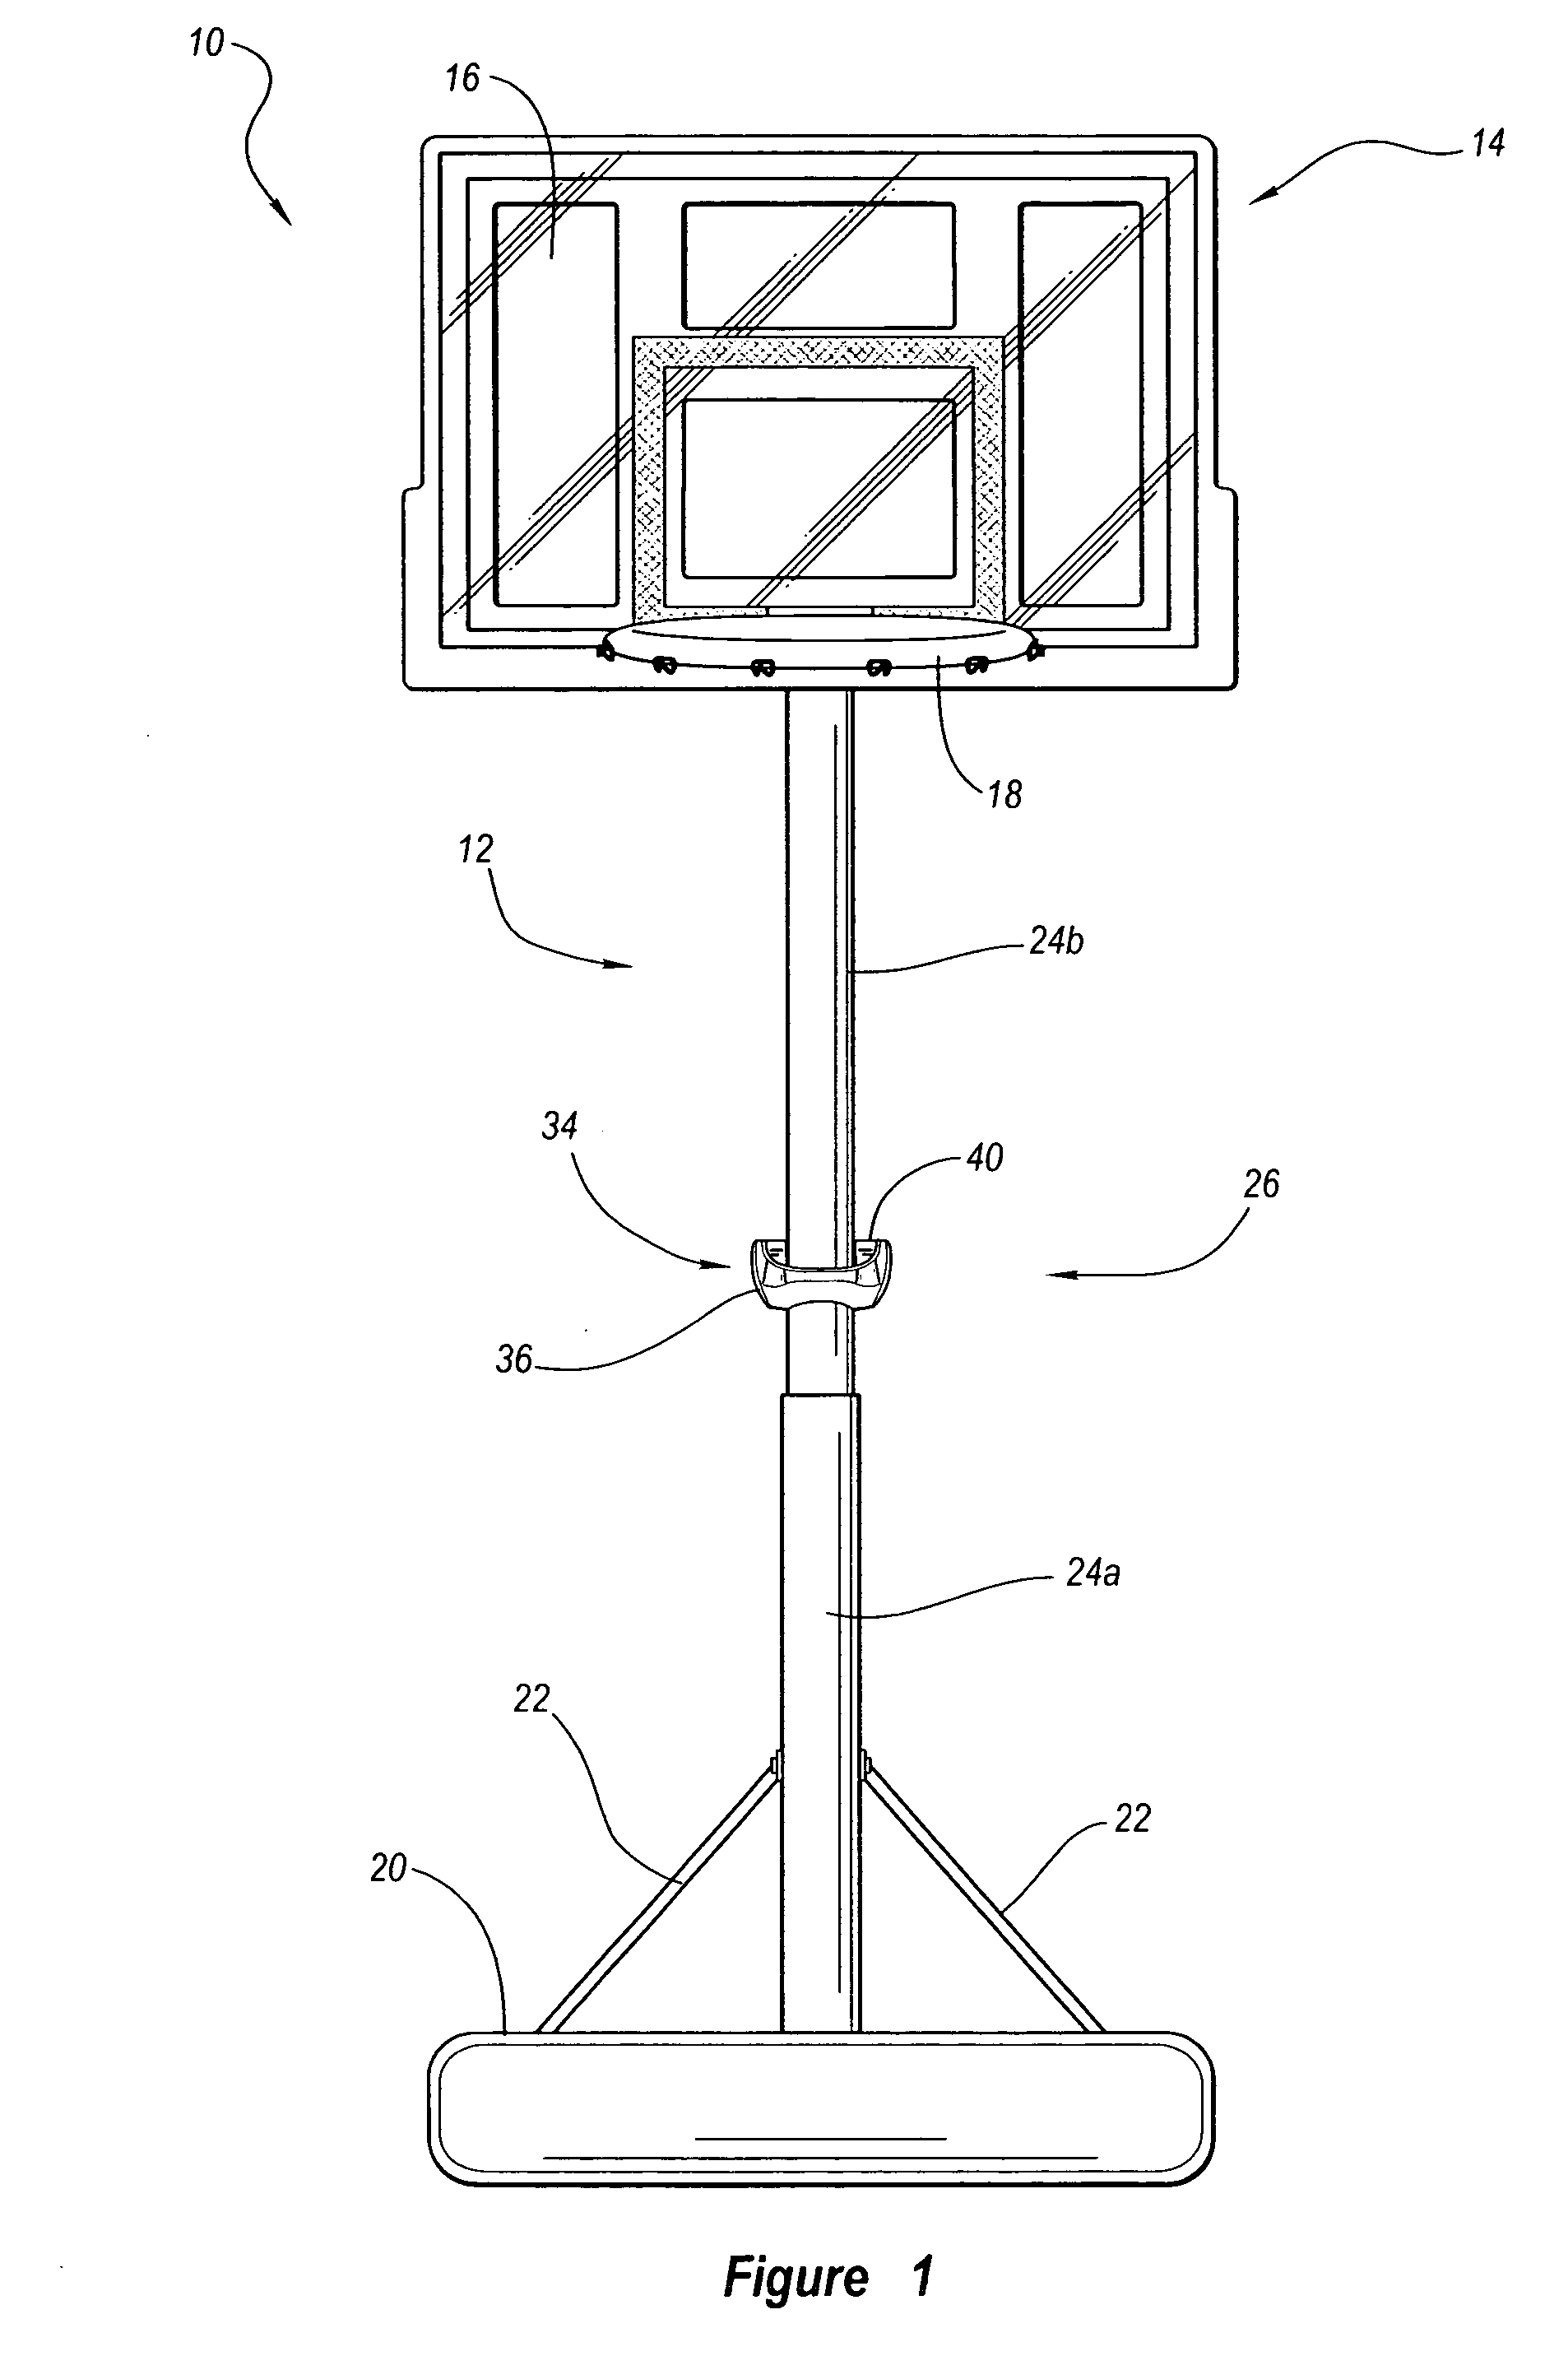 Support pole for a basketball system